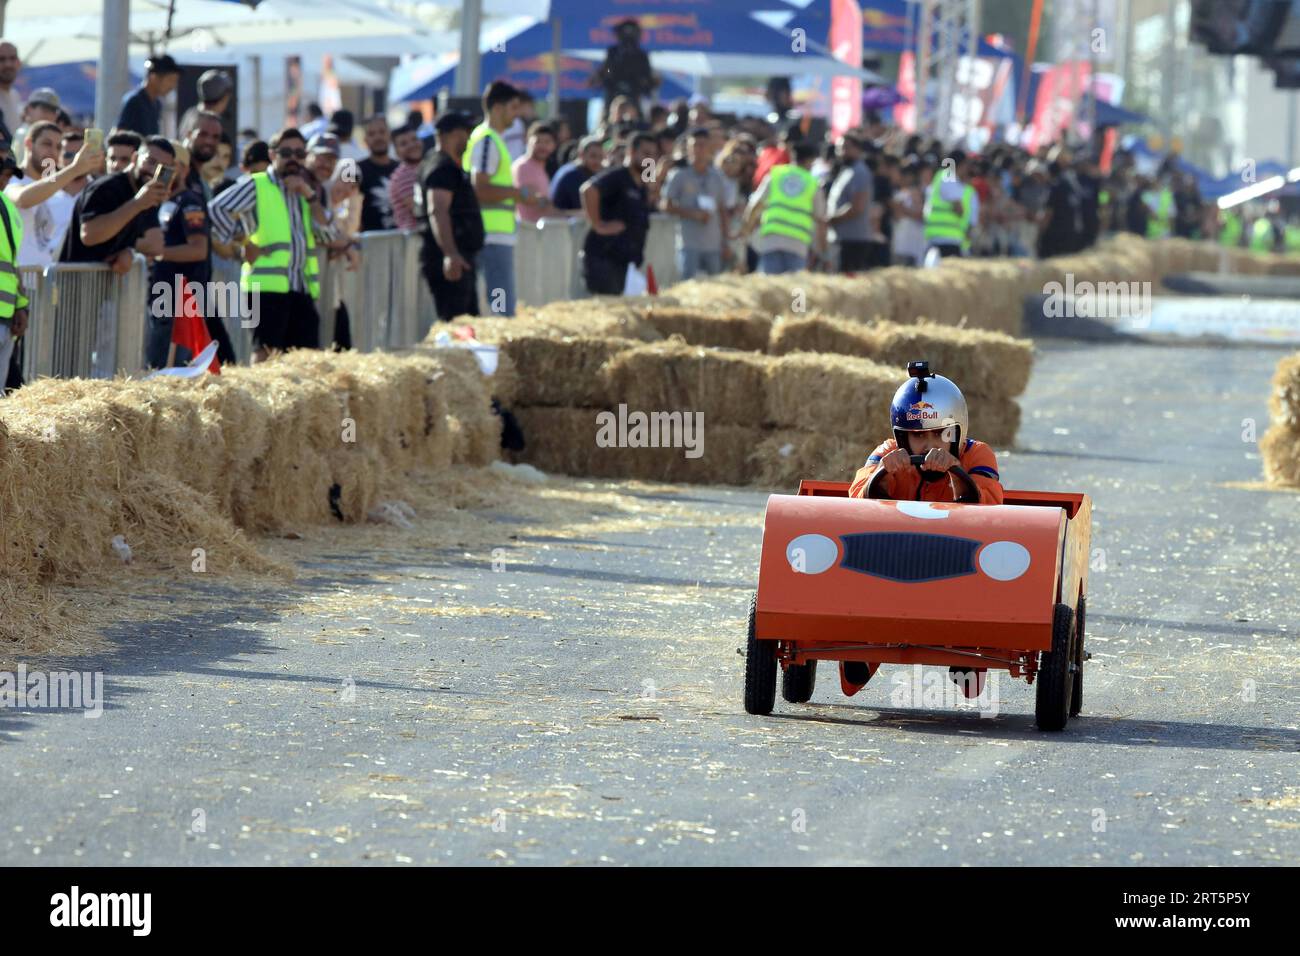 https://c8.alamy.com/comp/2RT5P5Y/230909-amman-sept-9-2023-a-competitor-drives-a-hand-made-vehicle-during-the-red-bull-soapbox-race-2023-in-amman-jordan-on-sept-8-2023-photo-by-xinhua-jordan-amman-soapbox-race-mohammadxabuxghosh-publicationxnotxinxchn-2RT5P5Y.jpg